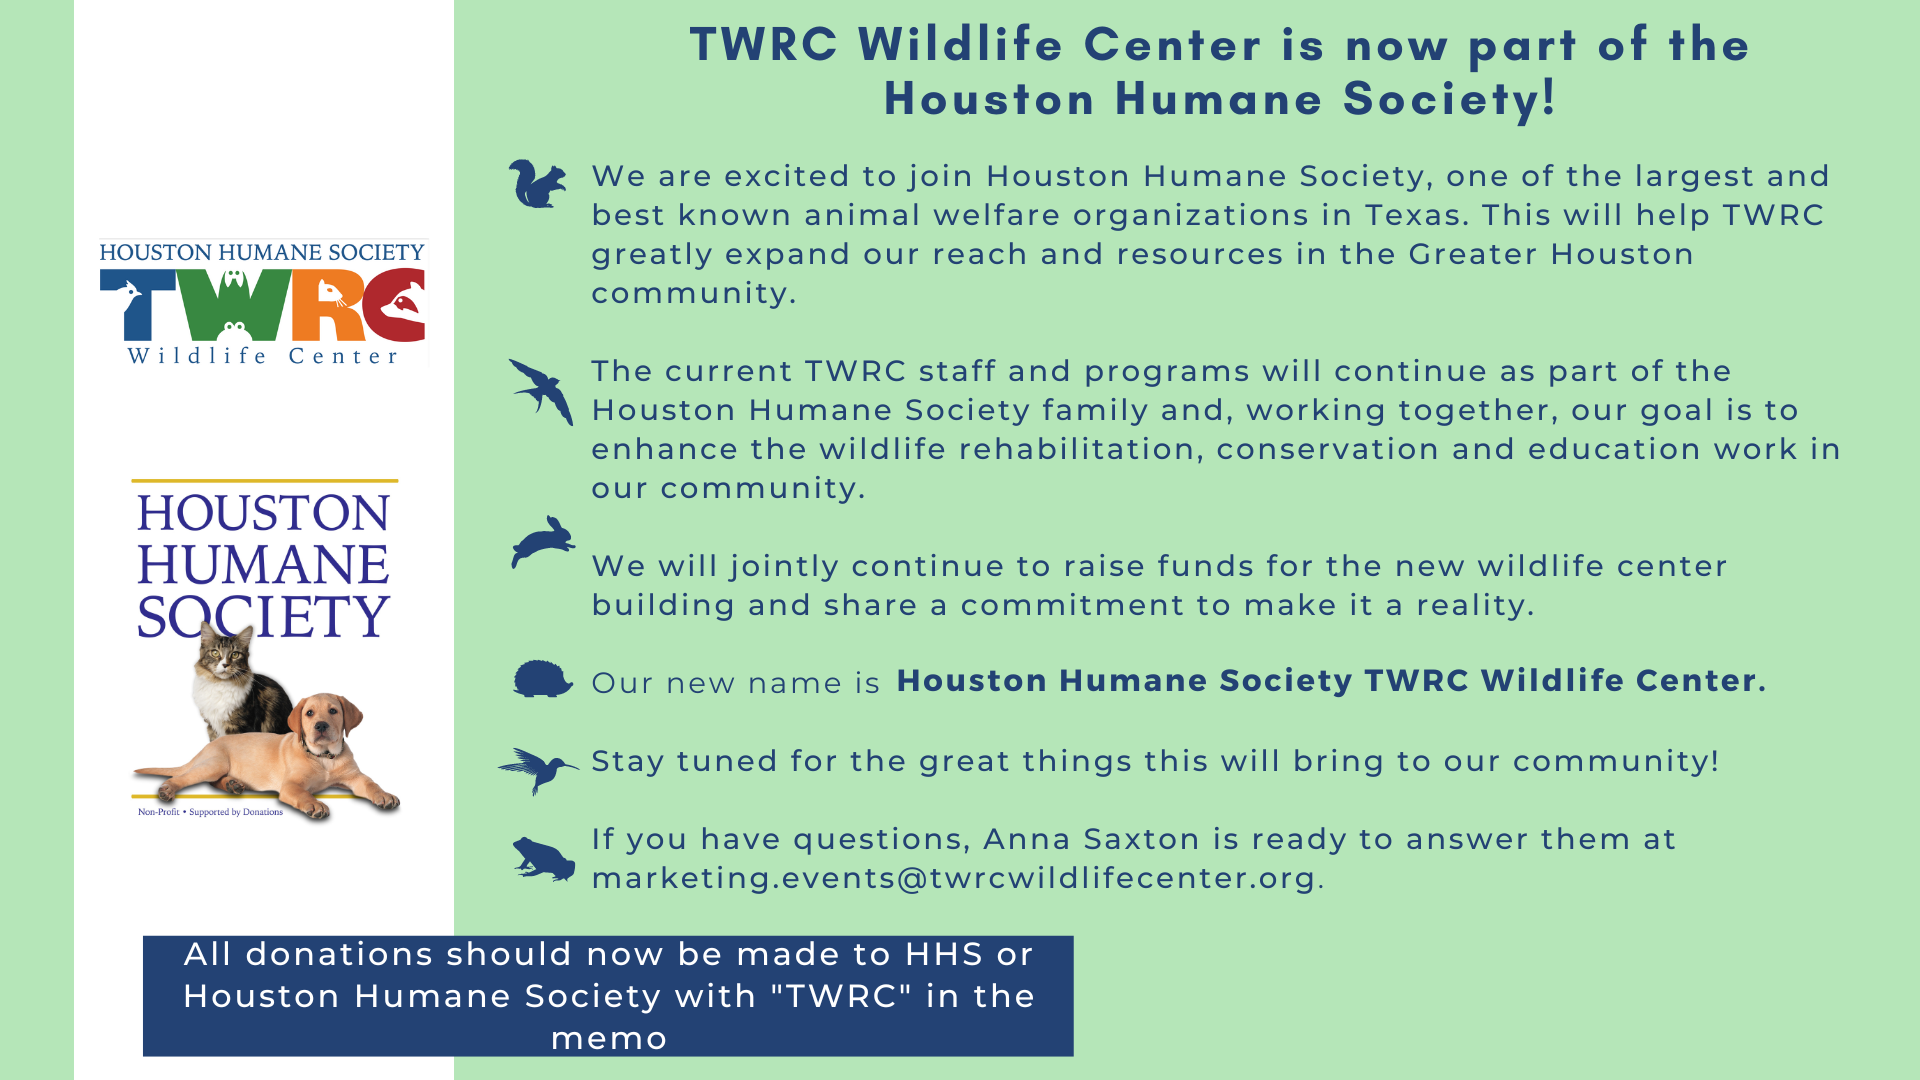 TRWC Wildlife is now a part of the Houston Humane Society